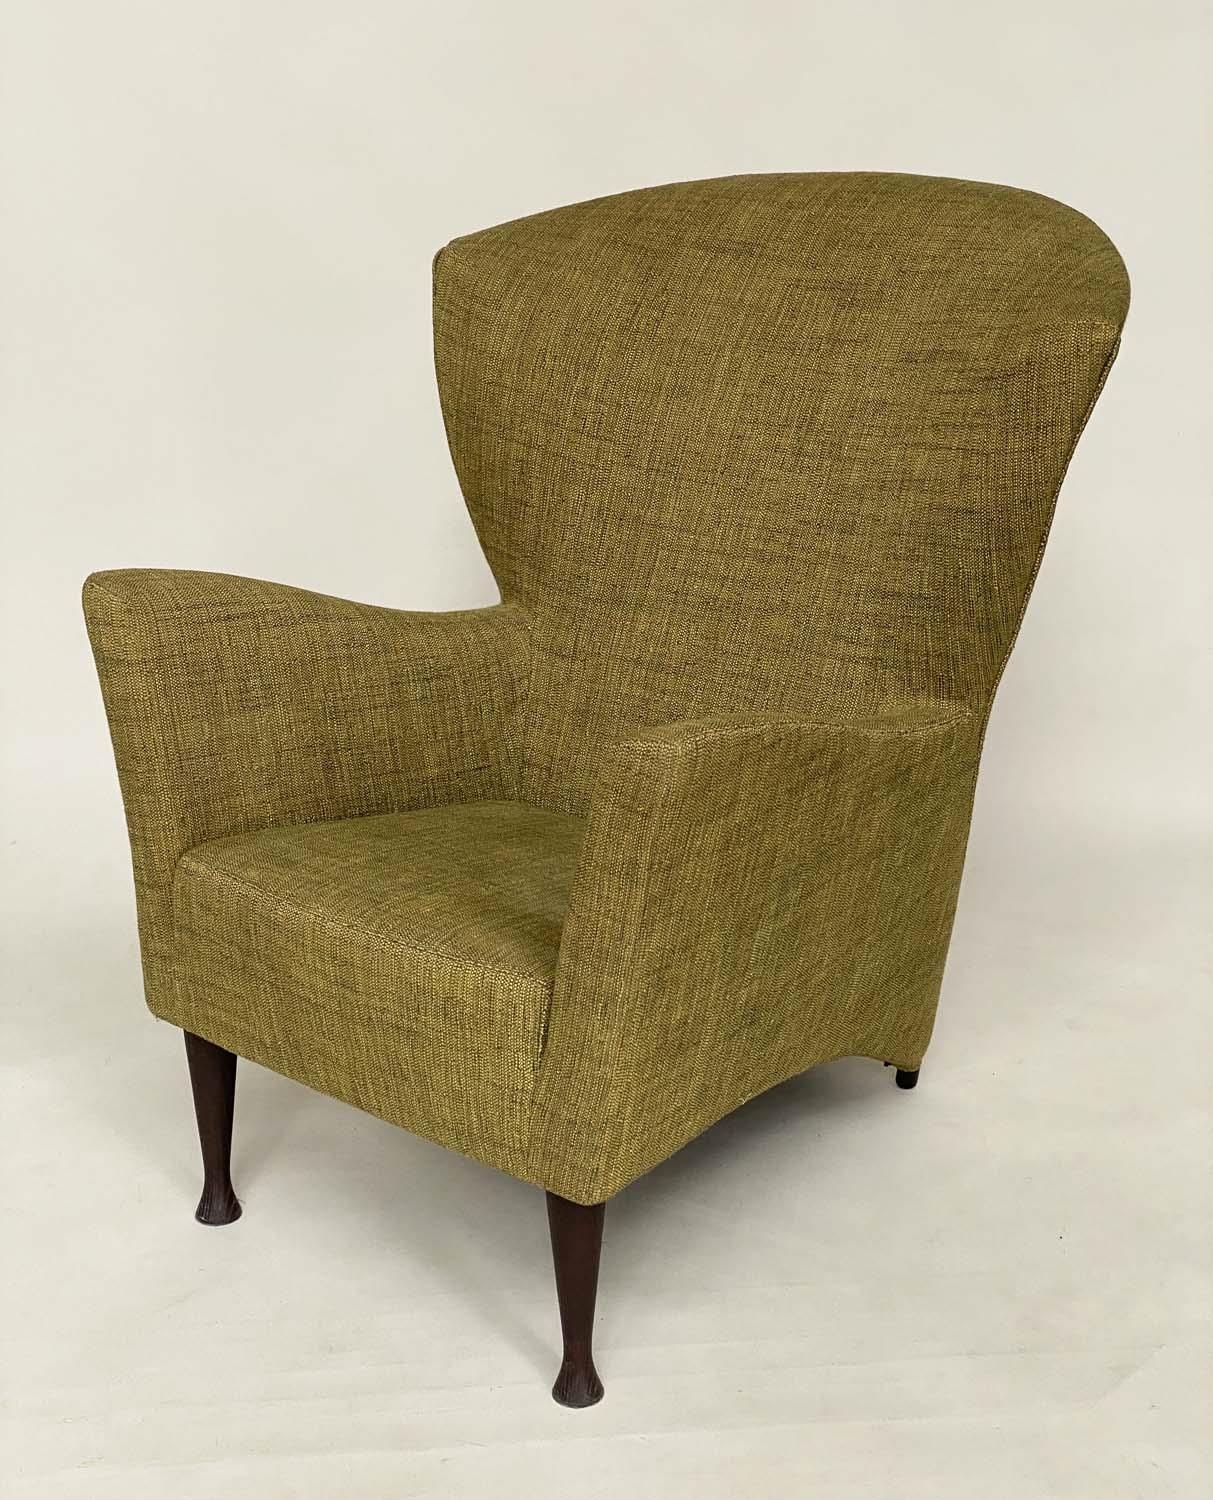 MANNER OF HOWARD KEITH ARMCHAIR, vintage 60s with wing back angular arms and green linen weave